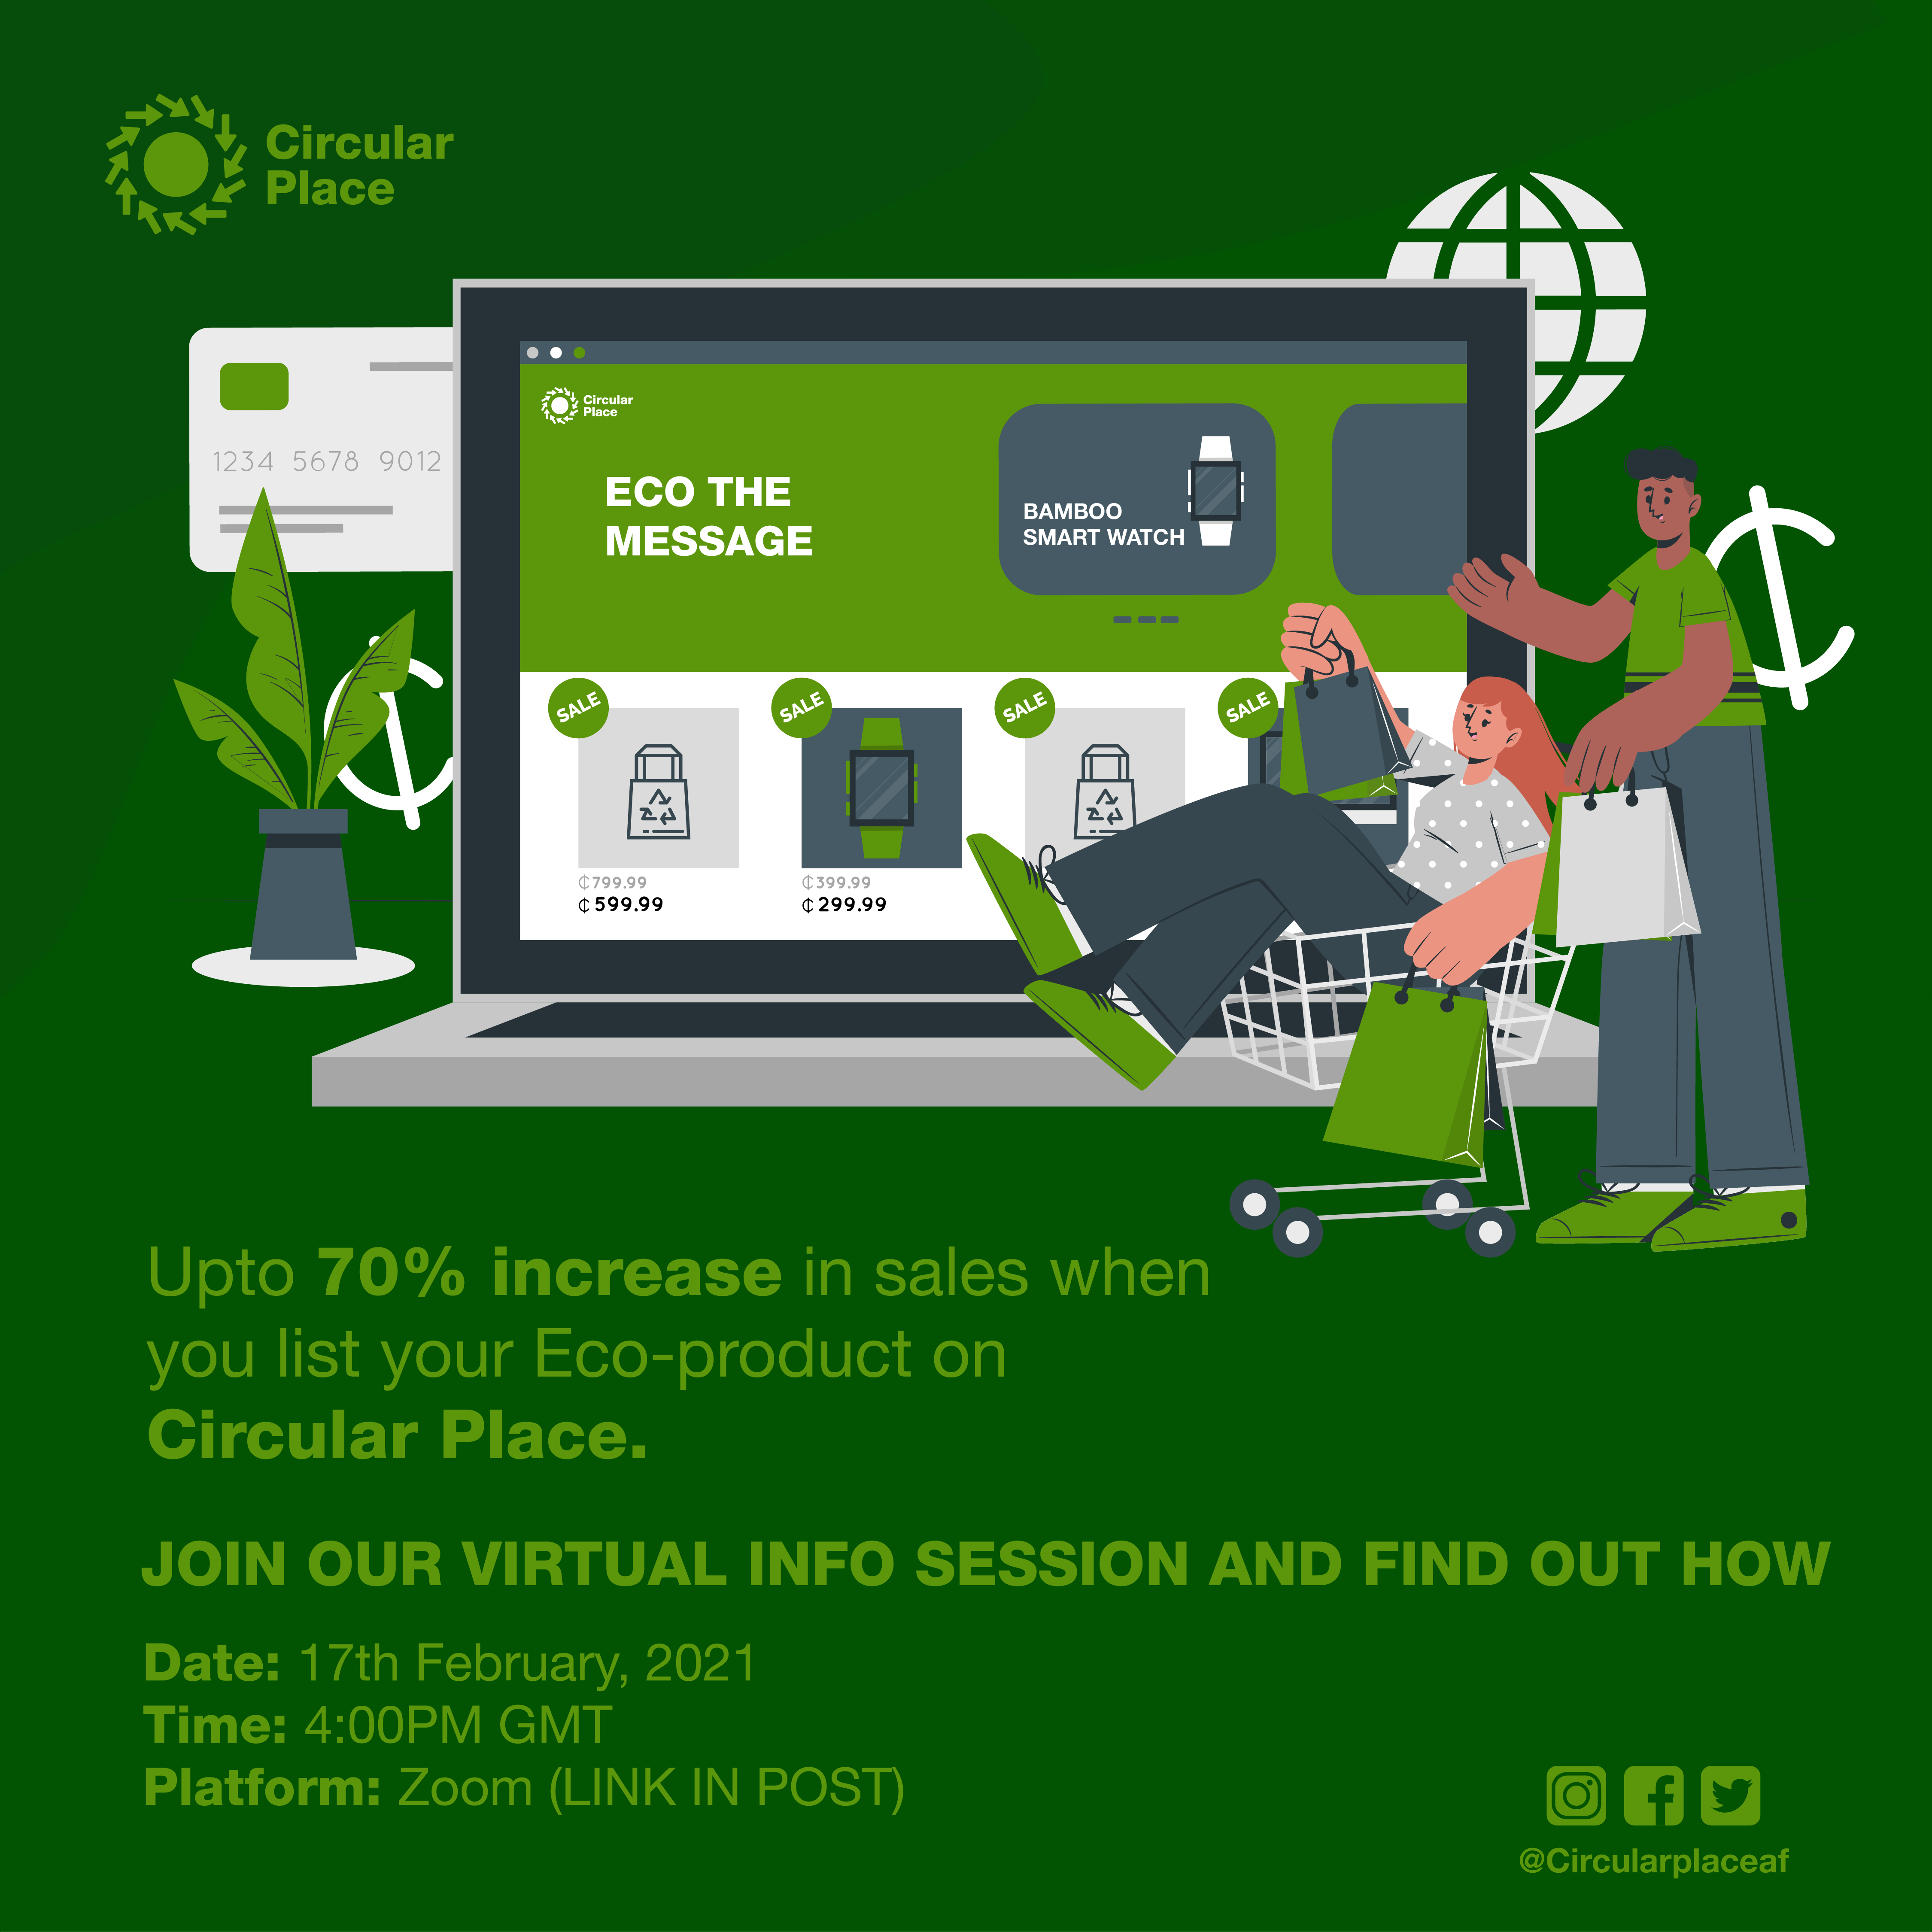 Africa's first green commerce marketplace info session goes live on zoom